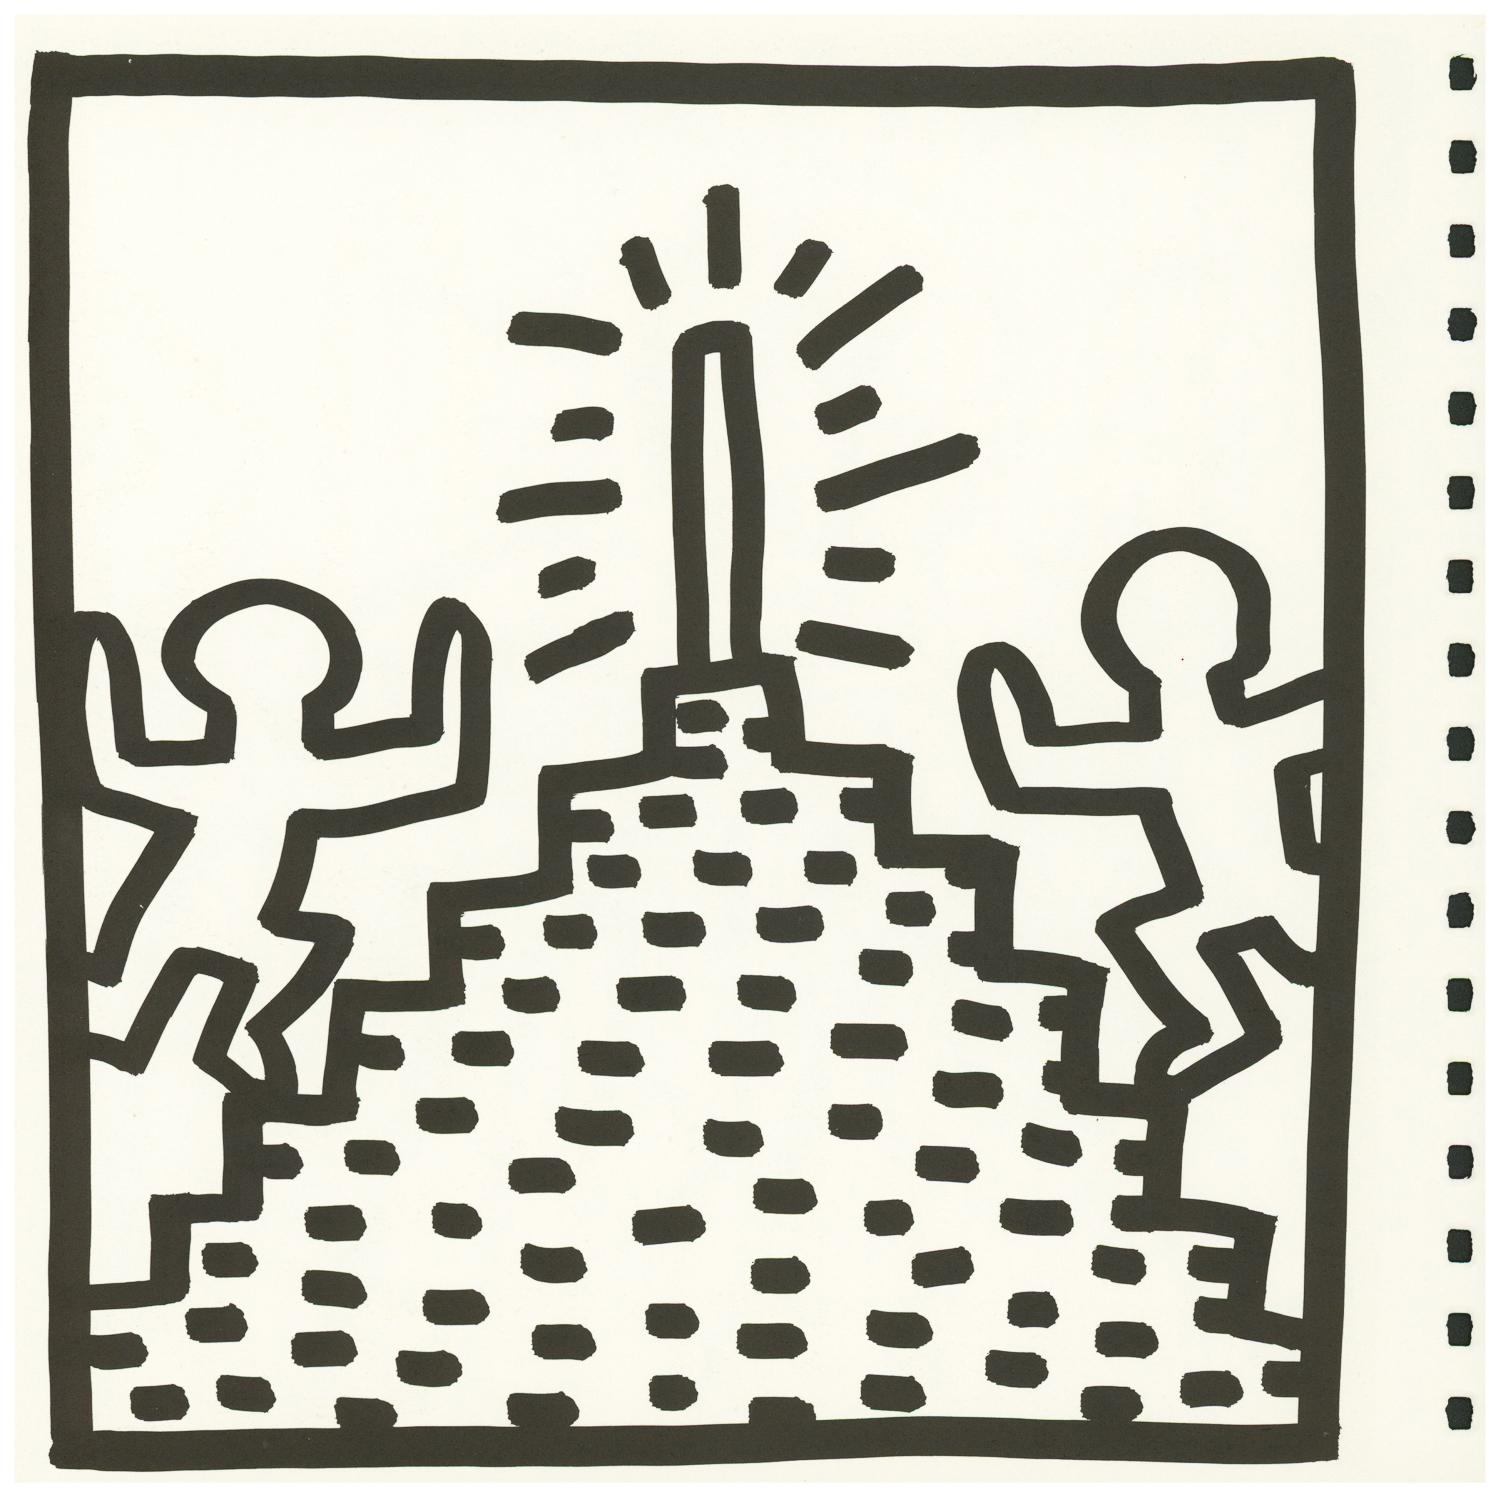 Keith Haring Tony Shafrazi gallery 1982:
A set of 4 double-sided lithographic inserts from the seminal spiral bound, 1982 Tony Shafrazi monograph showcasing Haring's early work.

Offset lithographs (comprised of 4 double-sided individual pieces).